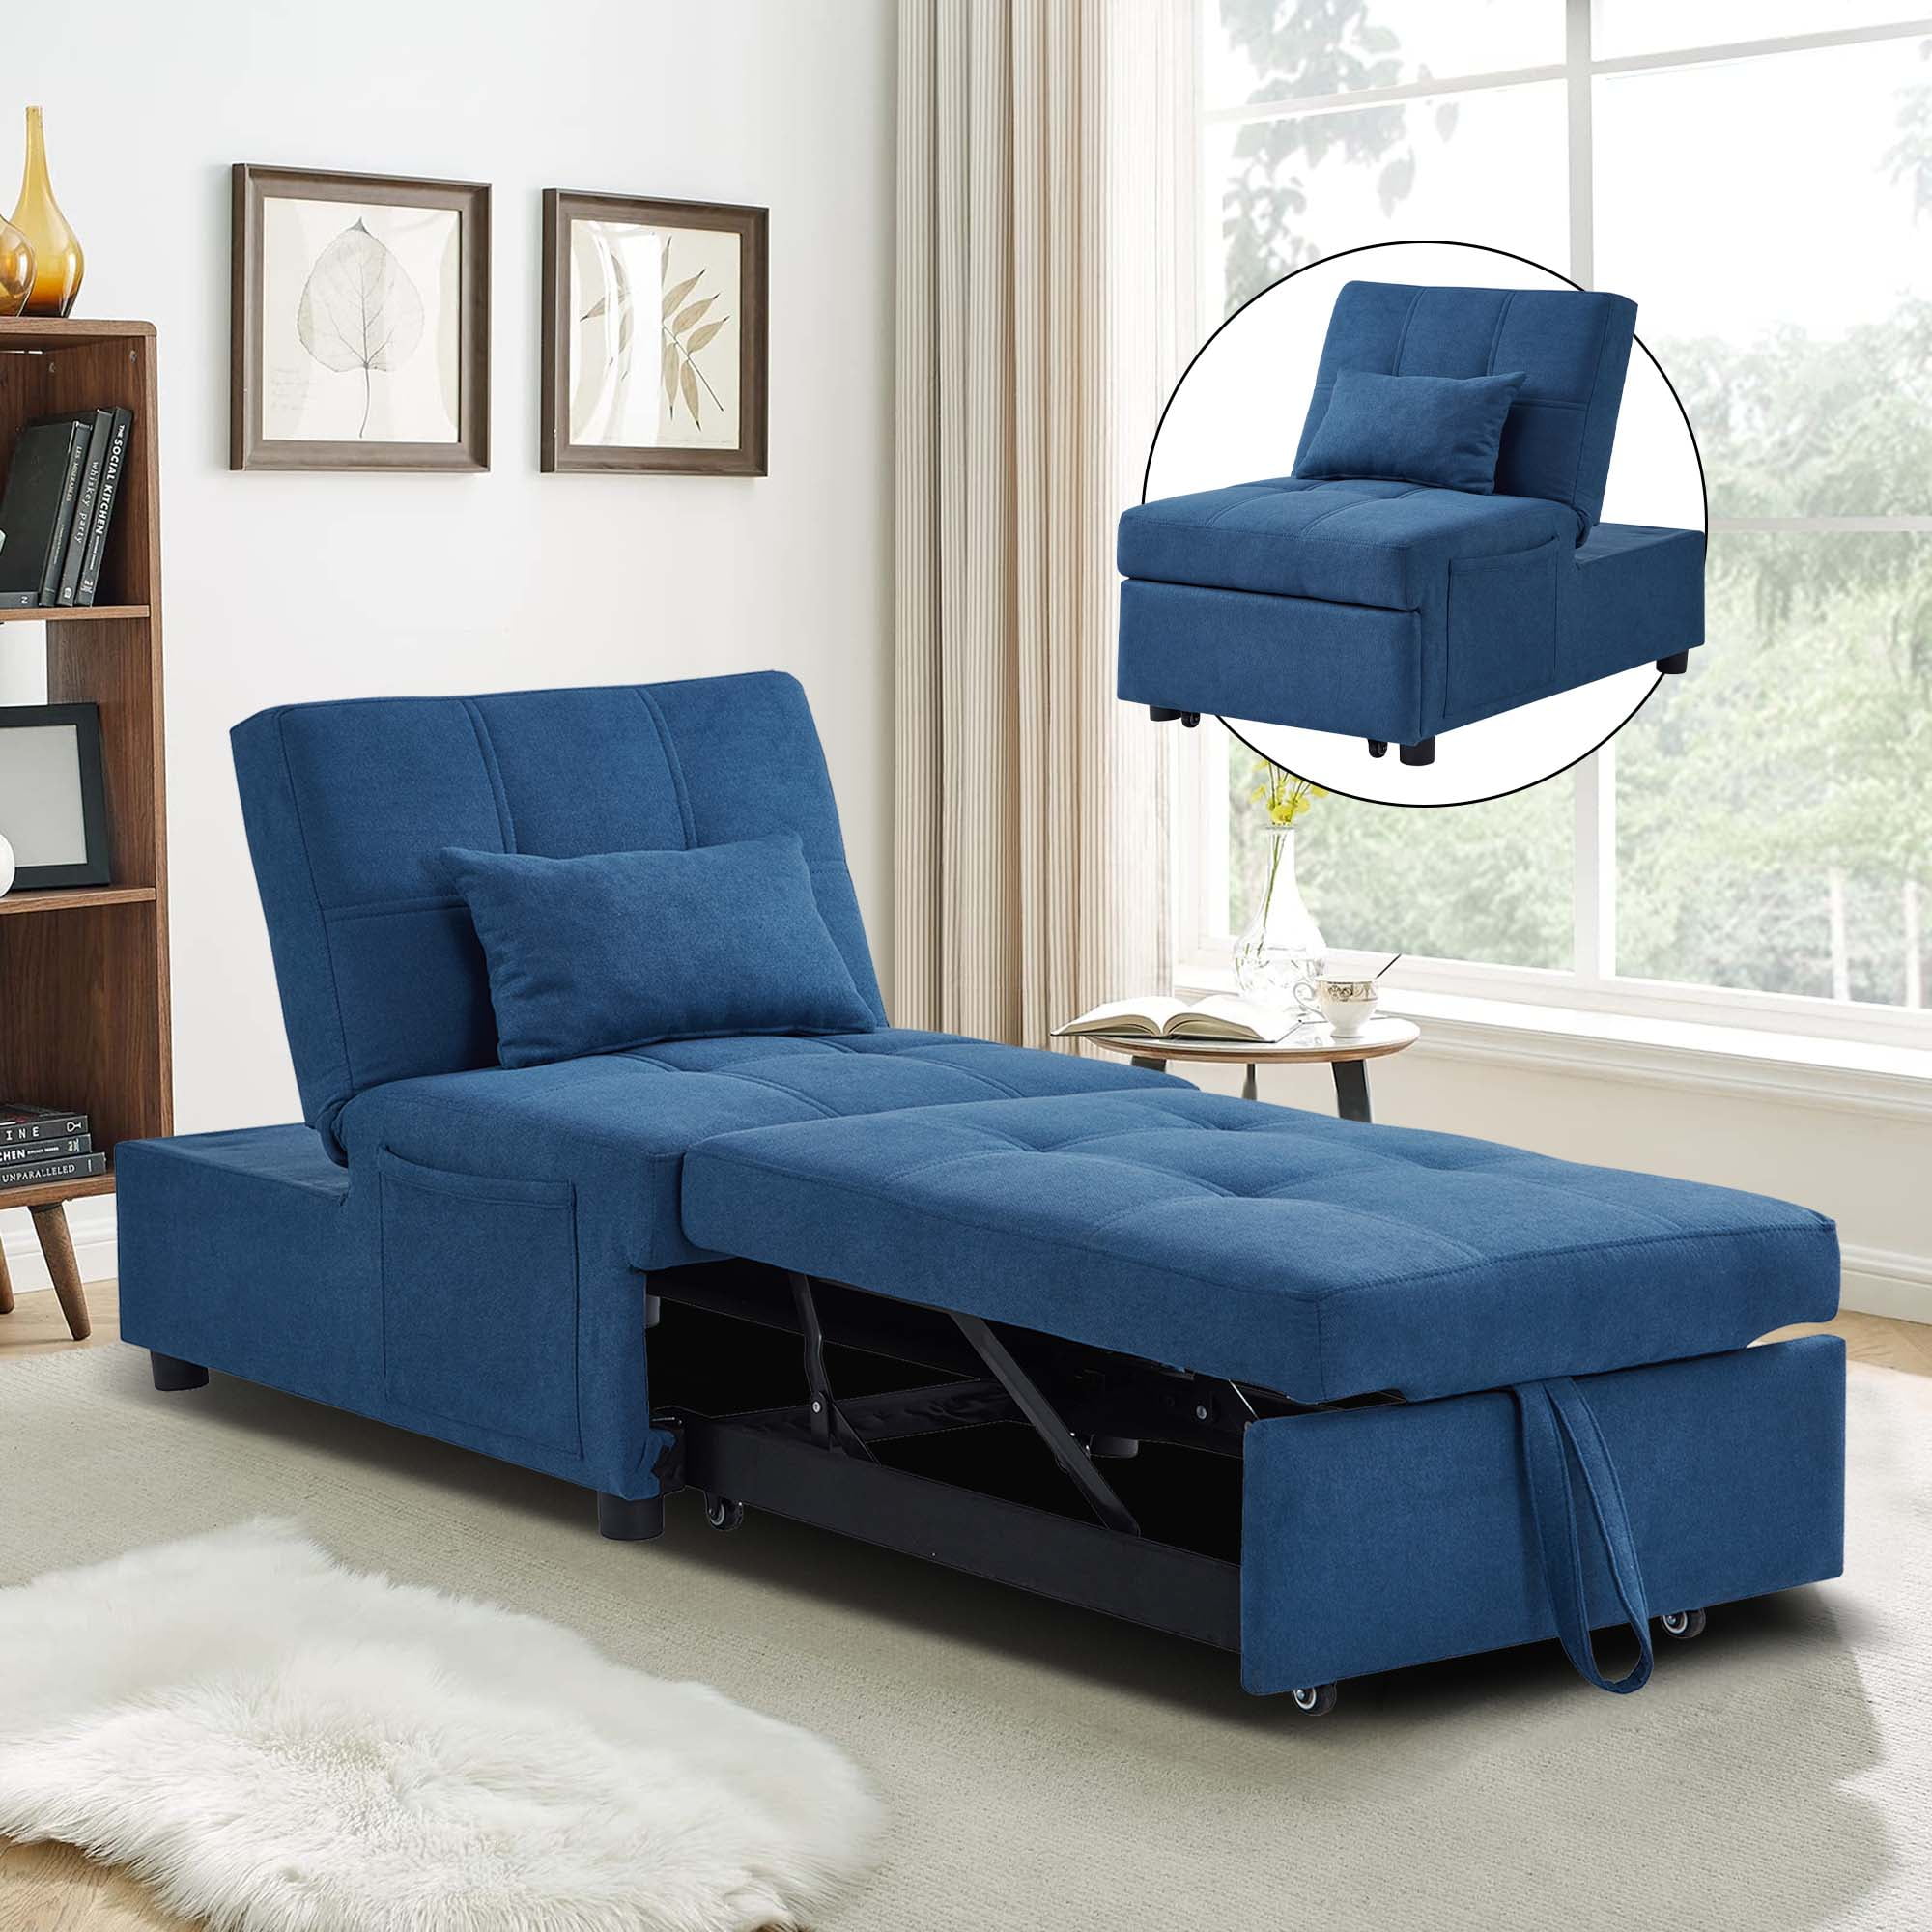 Aukfa Futon Sleeper Chair Bed, Convertible Pull Out Sleeper Sofa Chair for Living Room, Linen - Blue